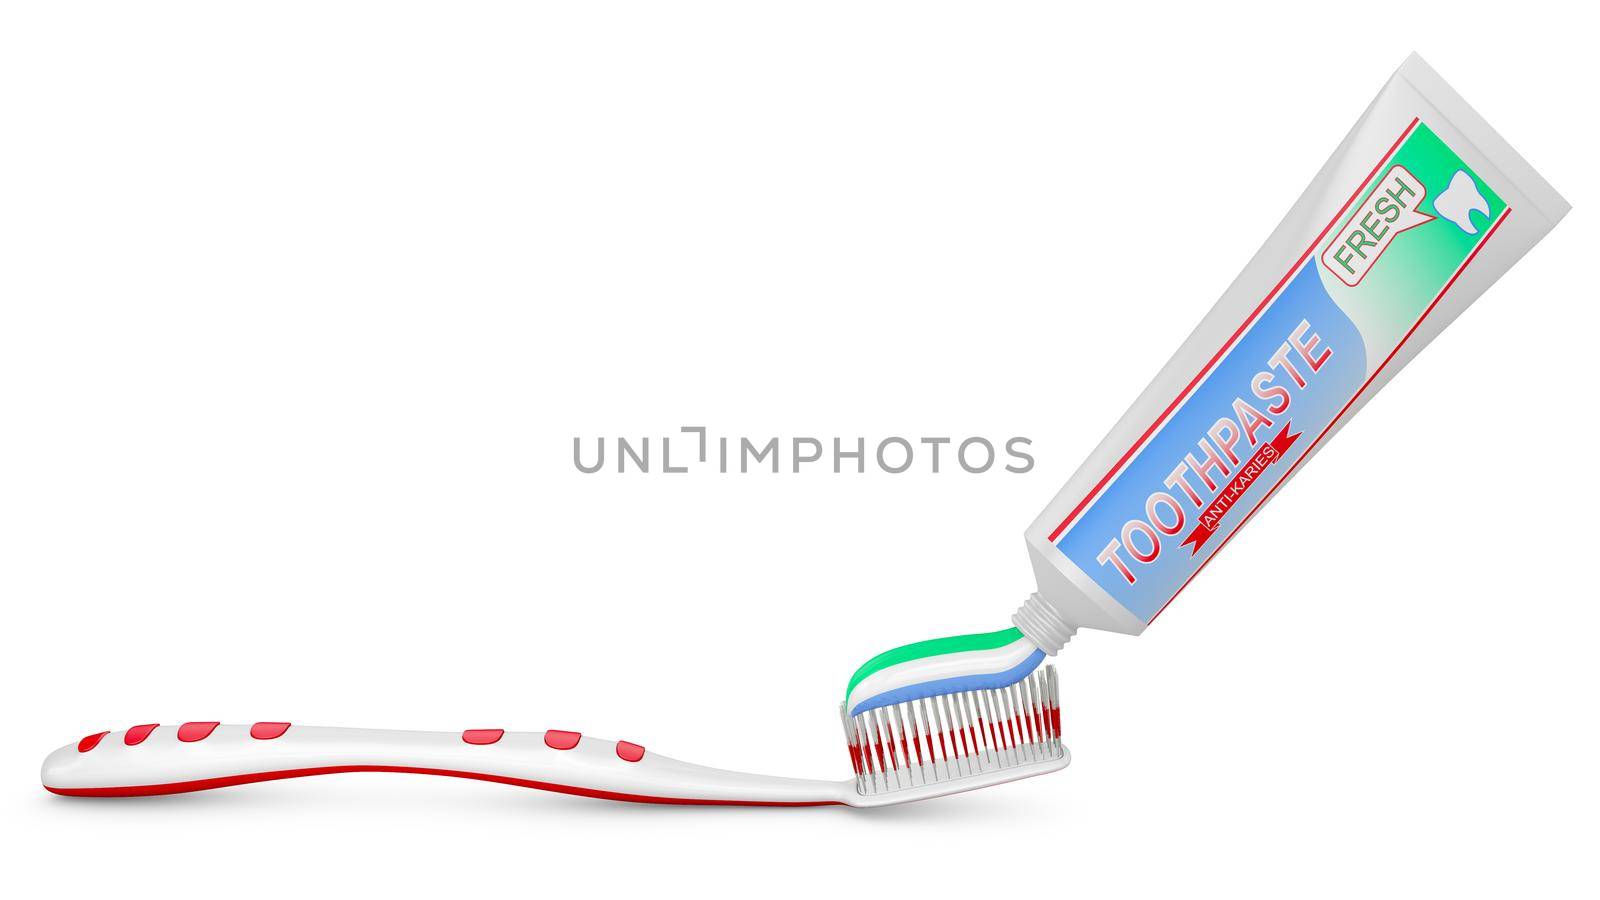 toothbrushes near the a tube of toothpaste.